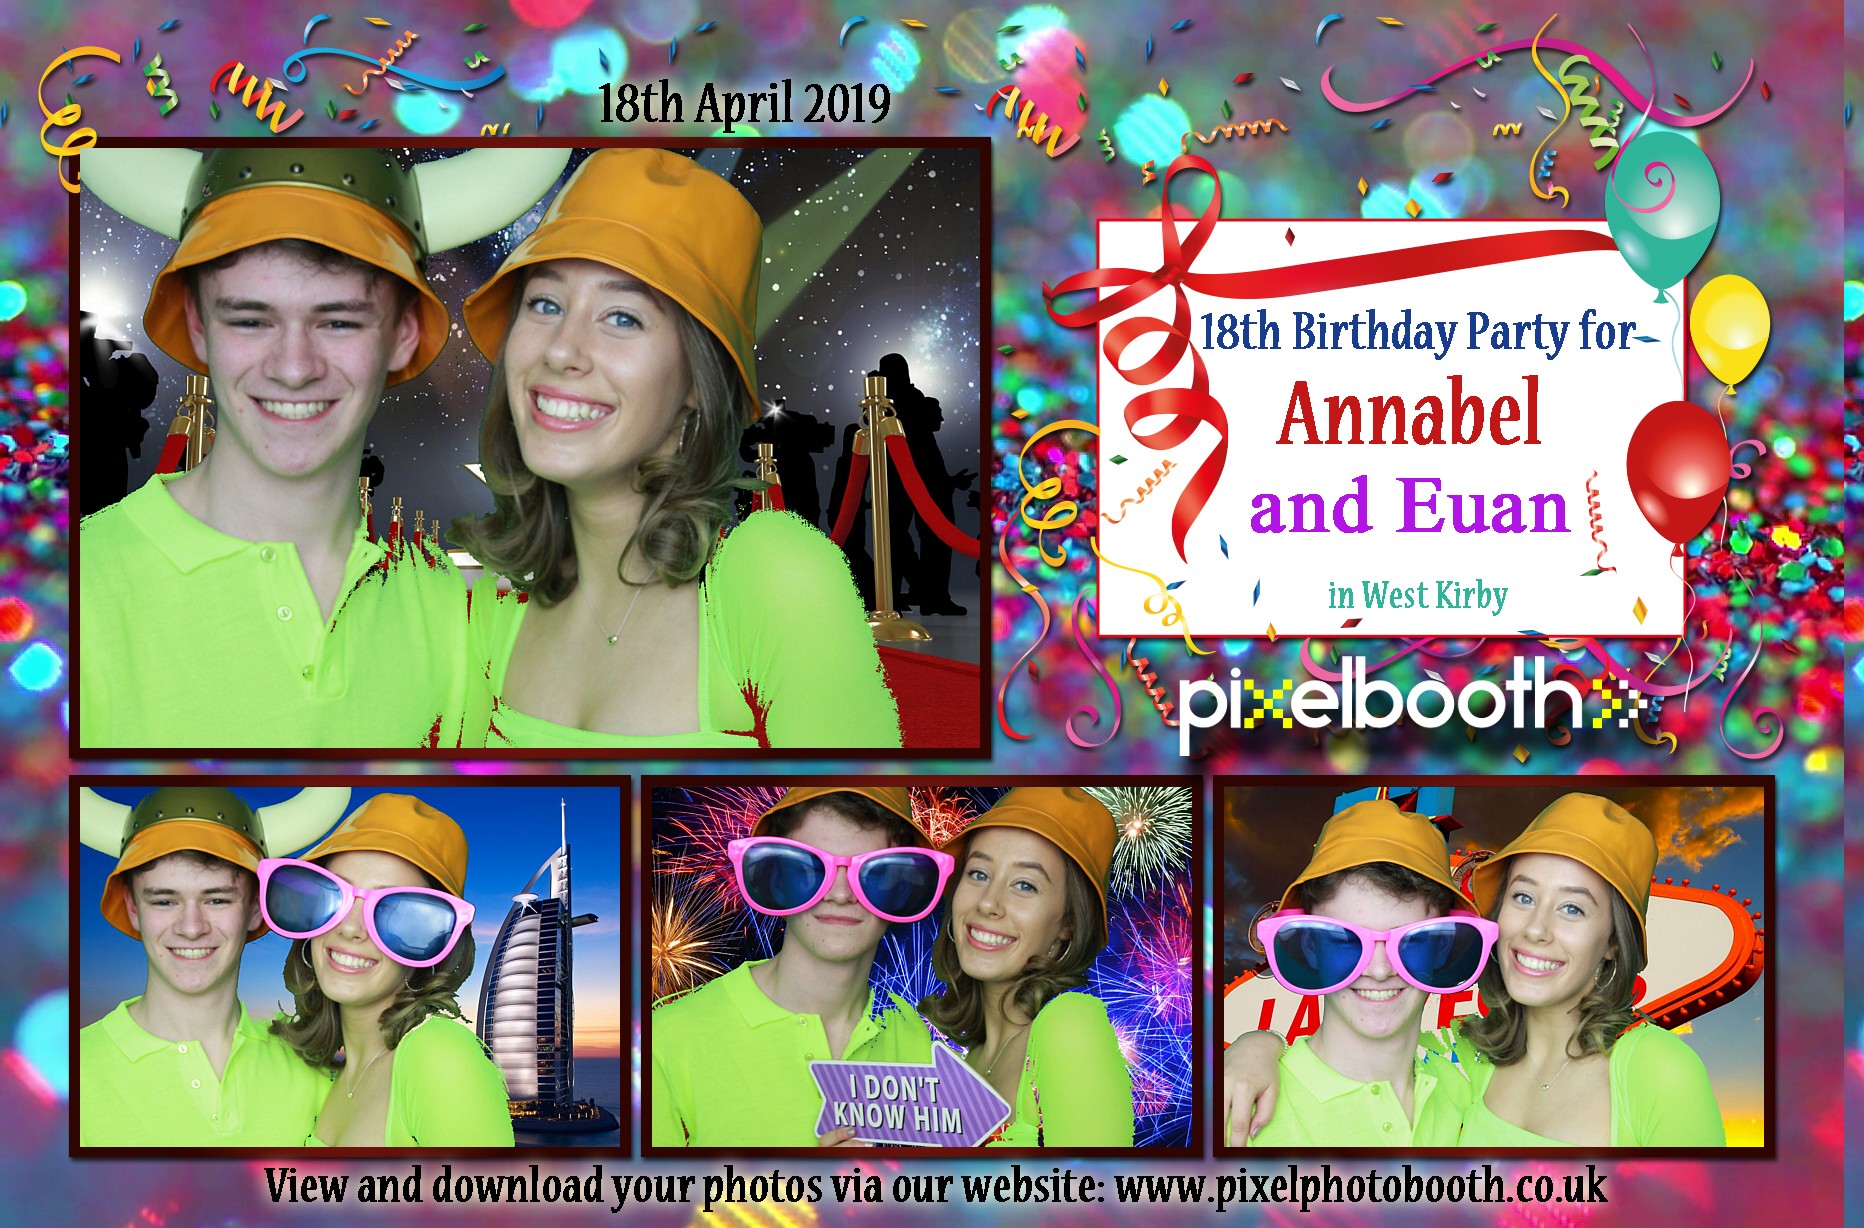 18th April 2019: Joint 18th Birthday for Annabel and Euan